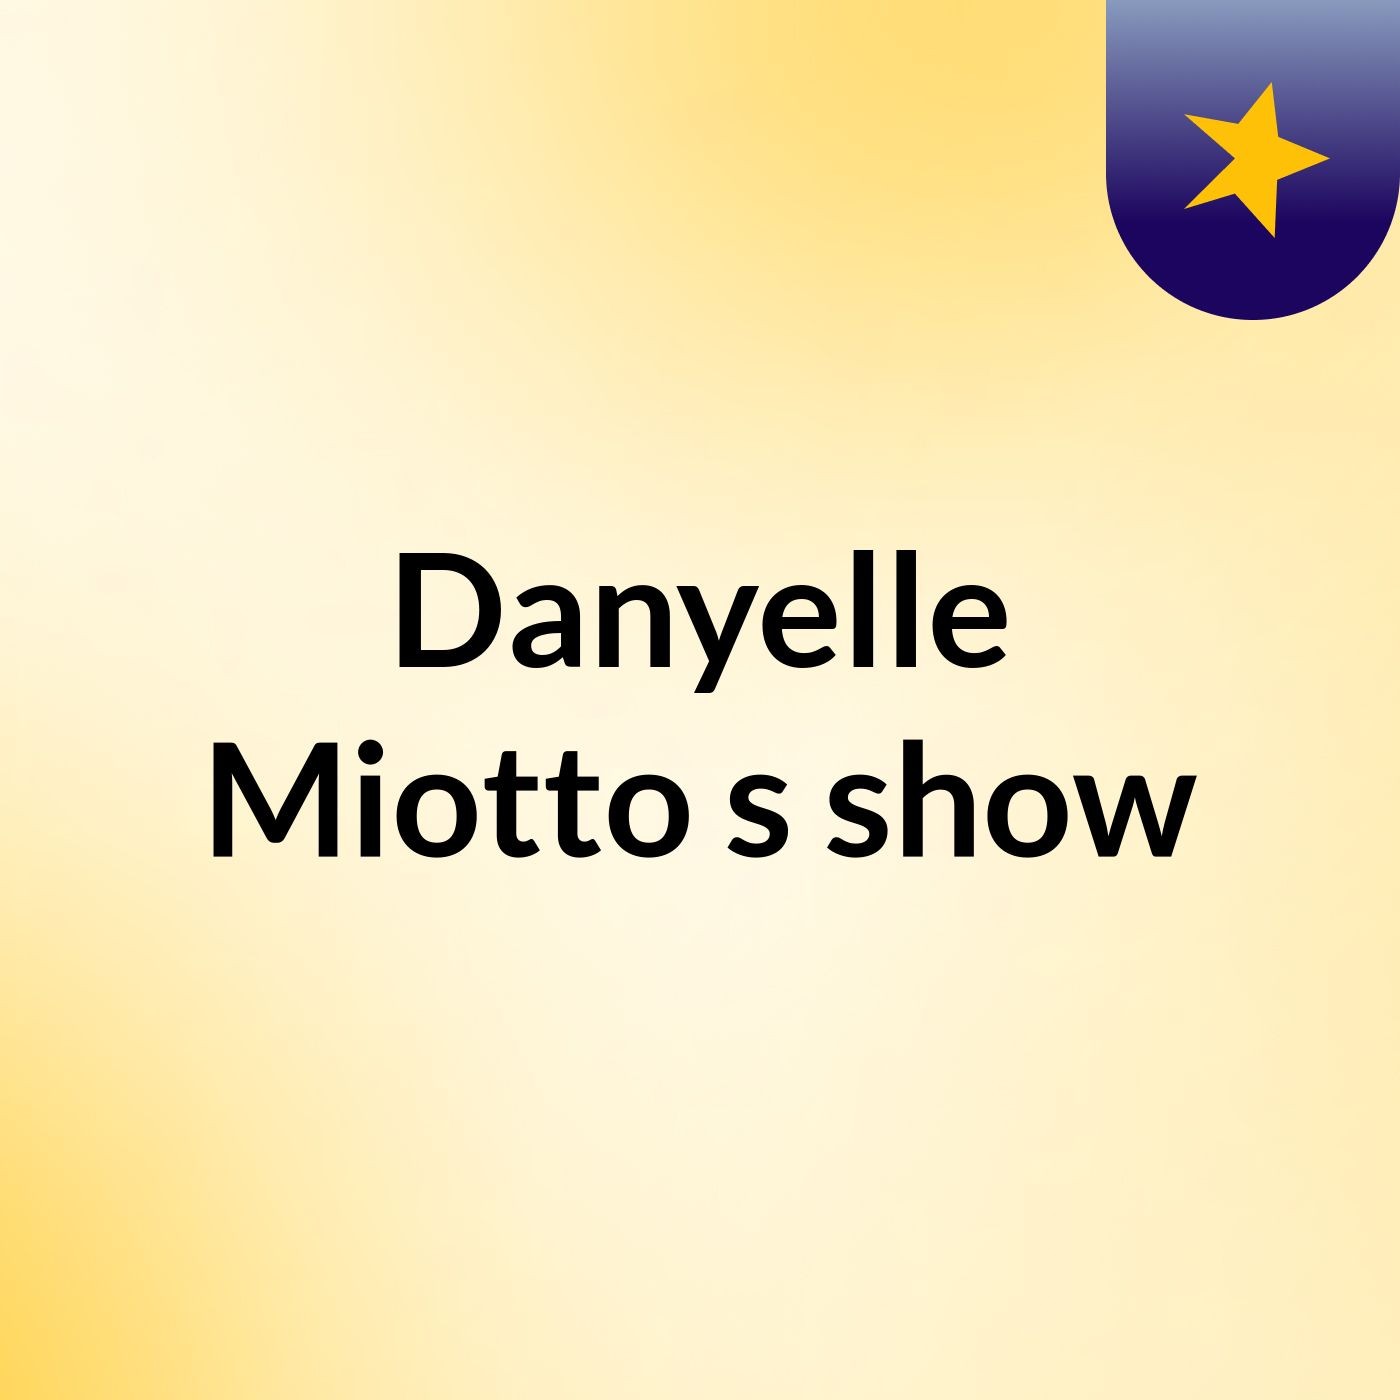 Danyelle Miotto's show